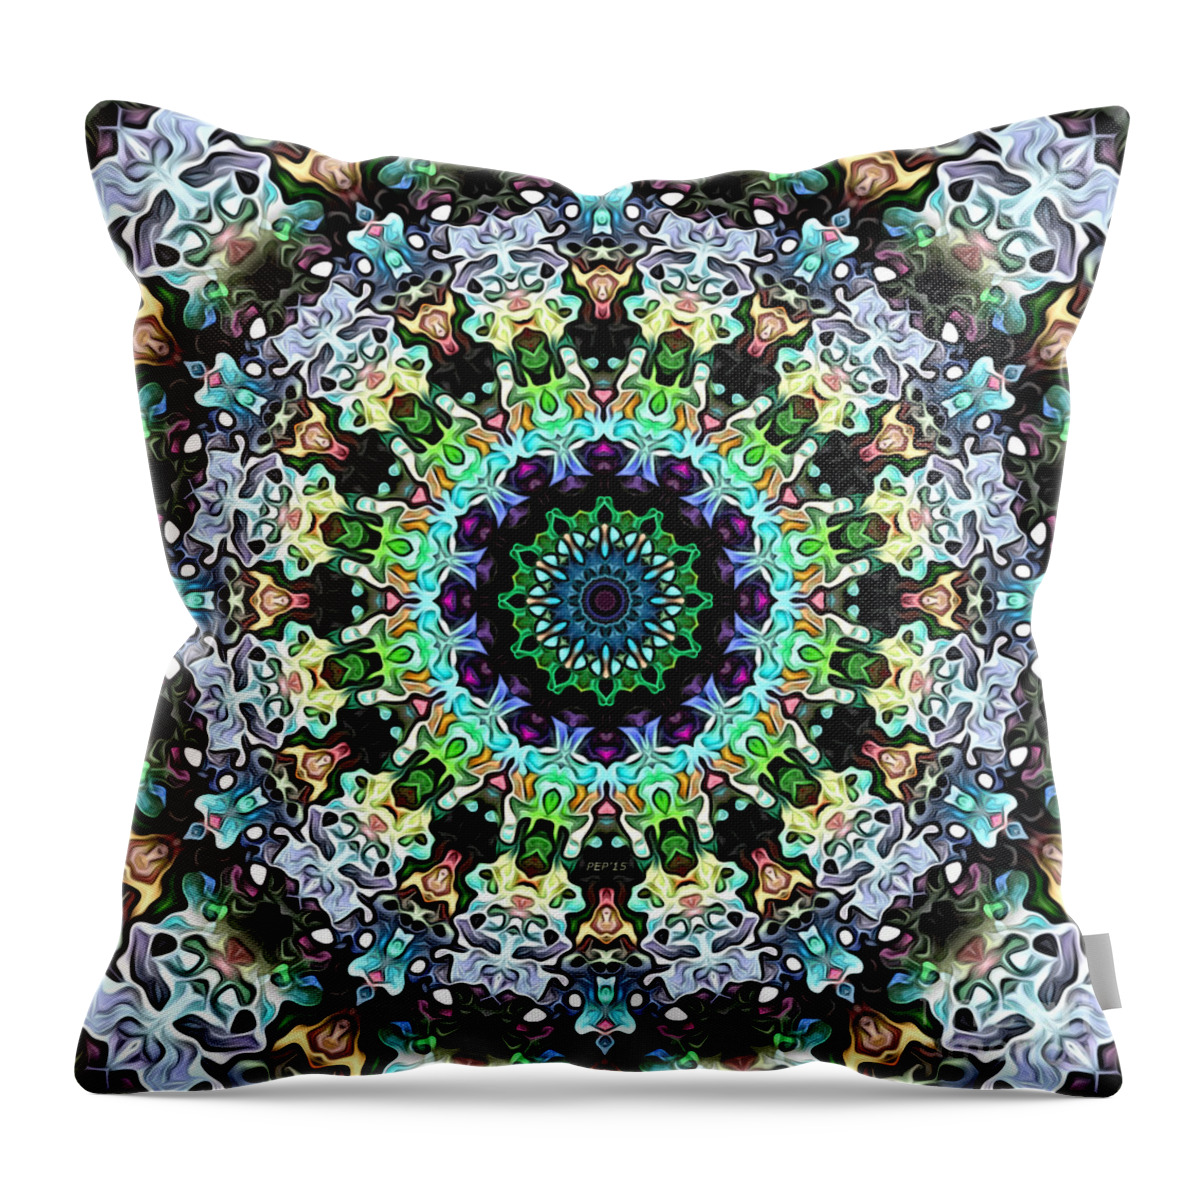 Mandala Throw Pillow featuring the digital art Circle of Colorful Symmetry by Phil Perkins